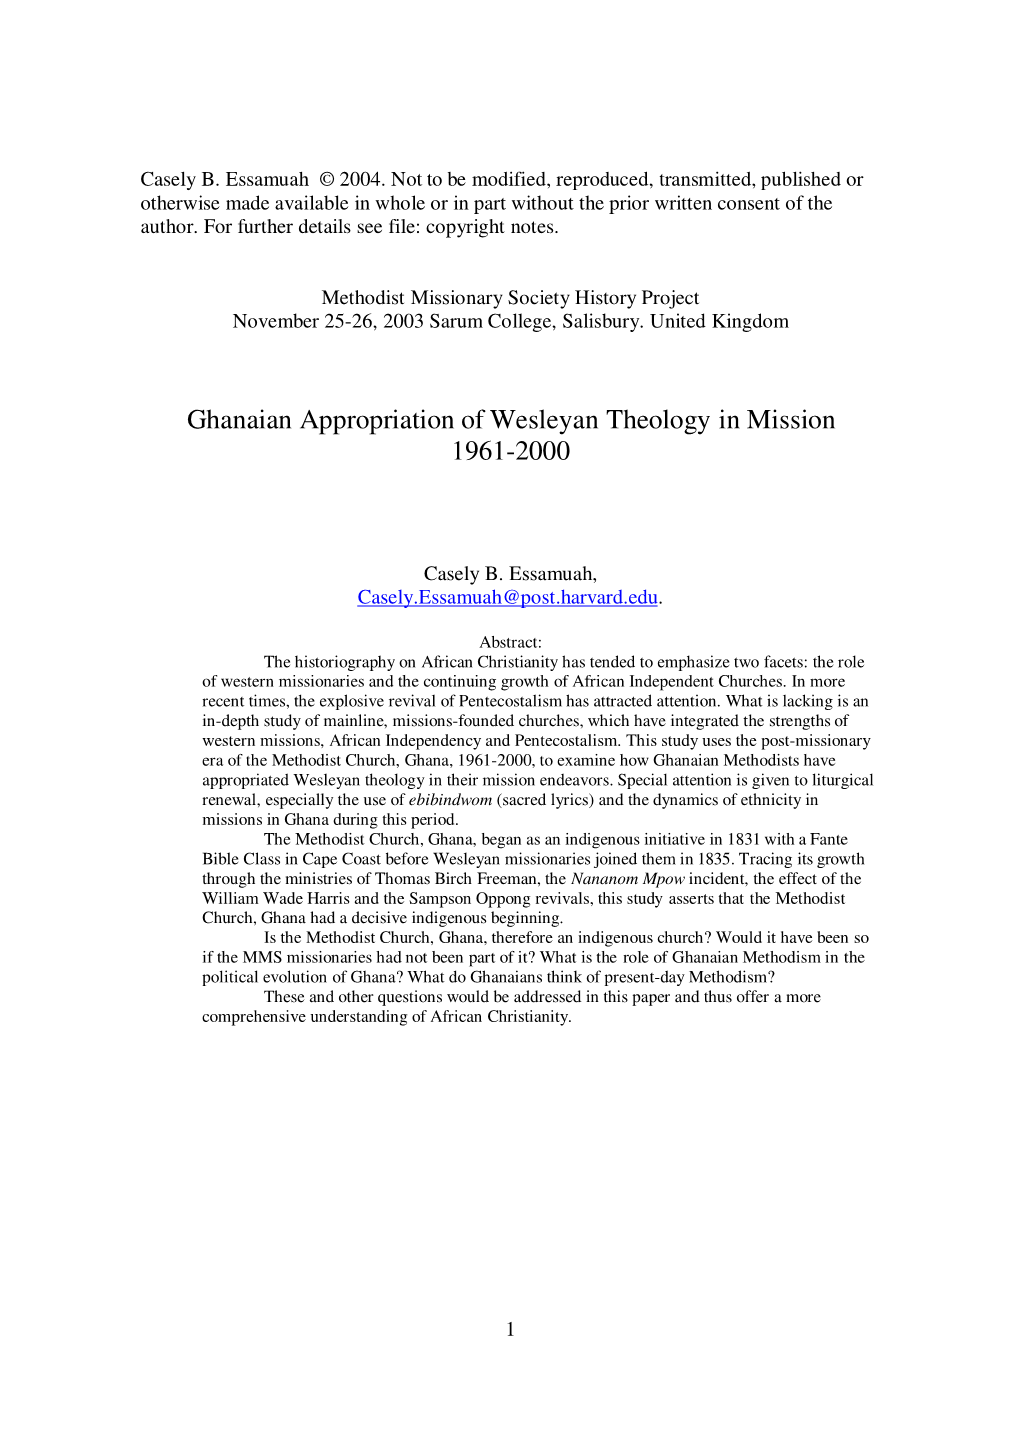 Ghanaian Appropriation of Wesleyan Theology in Mission 1961-2000